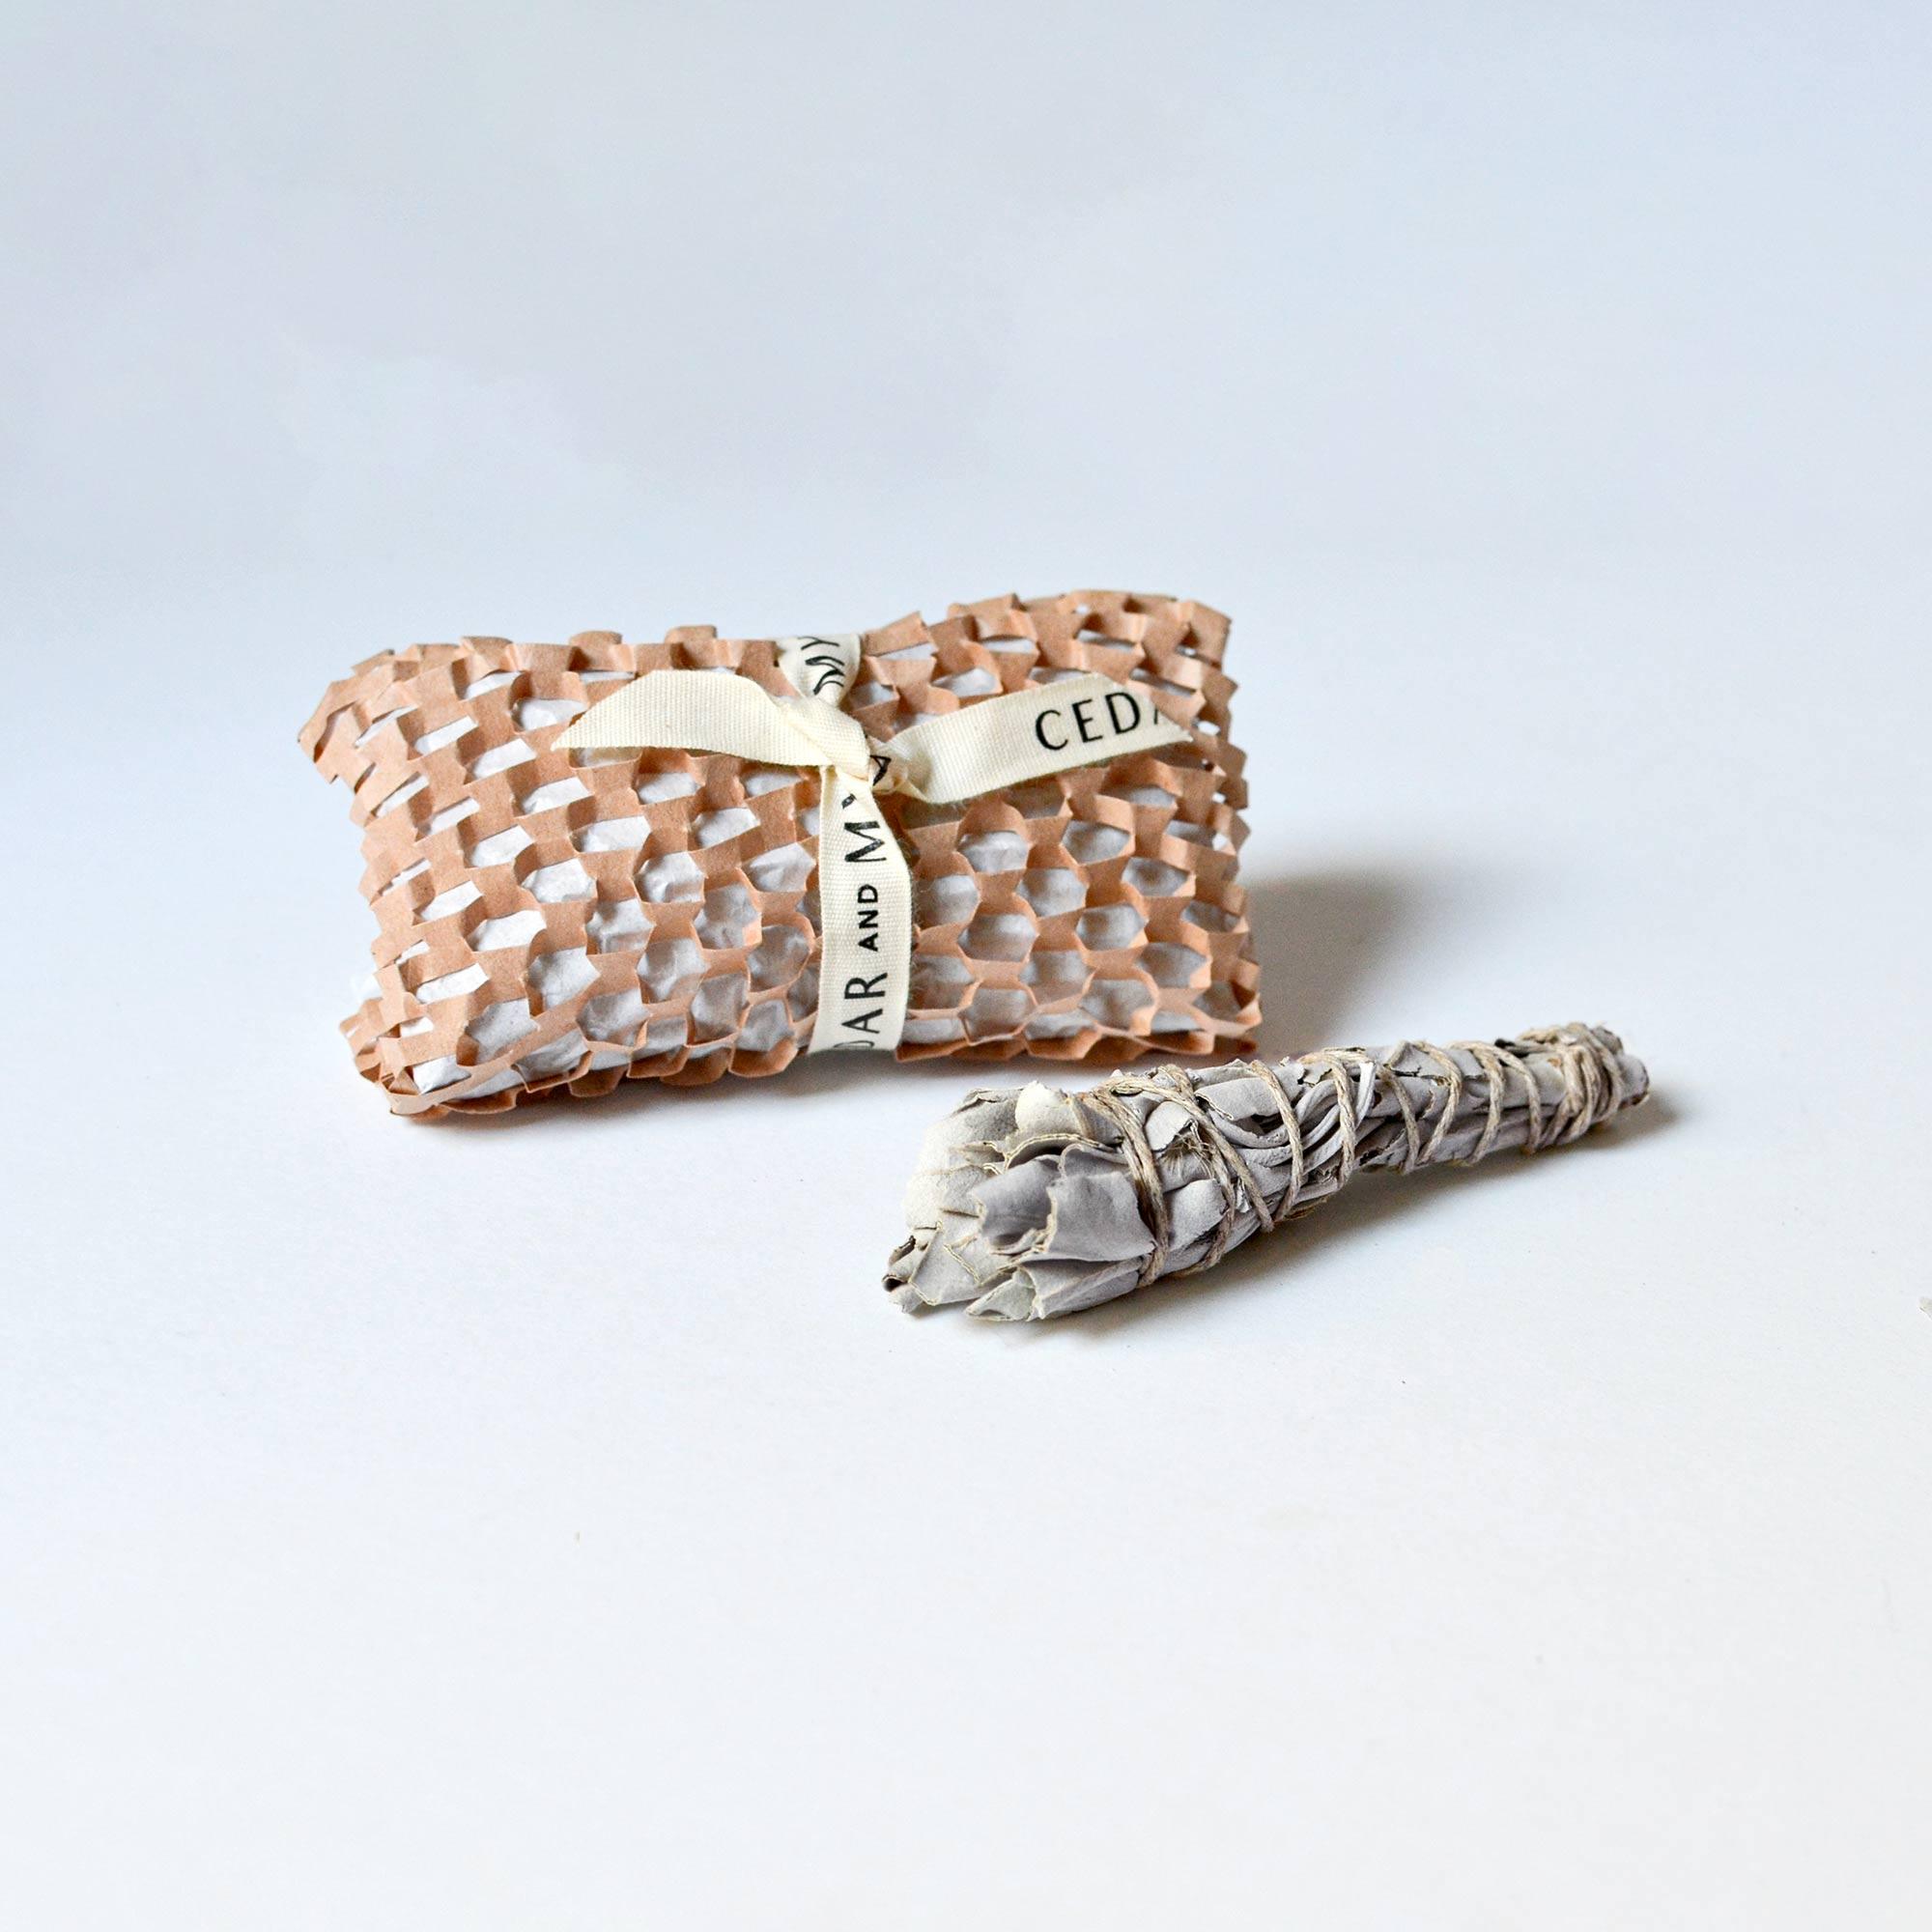 Mini white sage smudge stick and wrapped package with ribbon at the back.